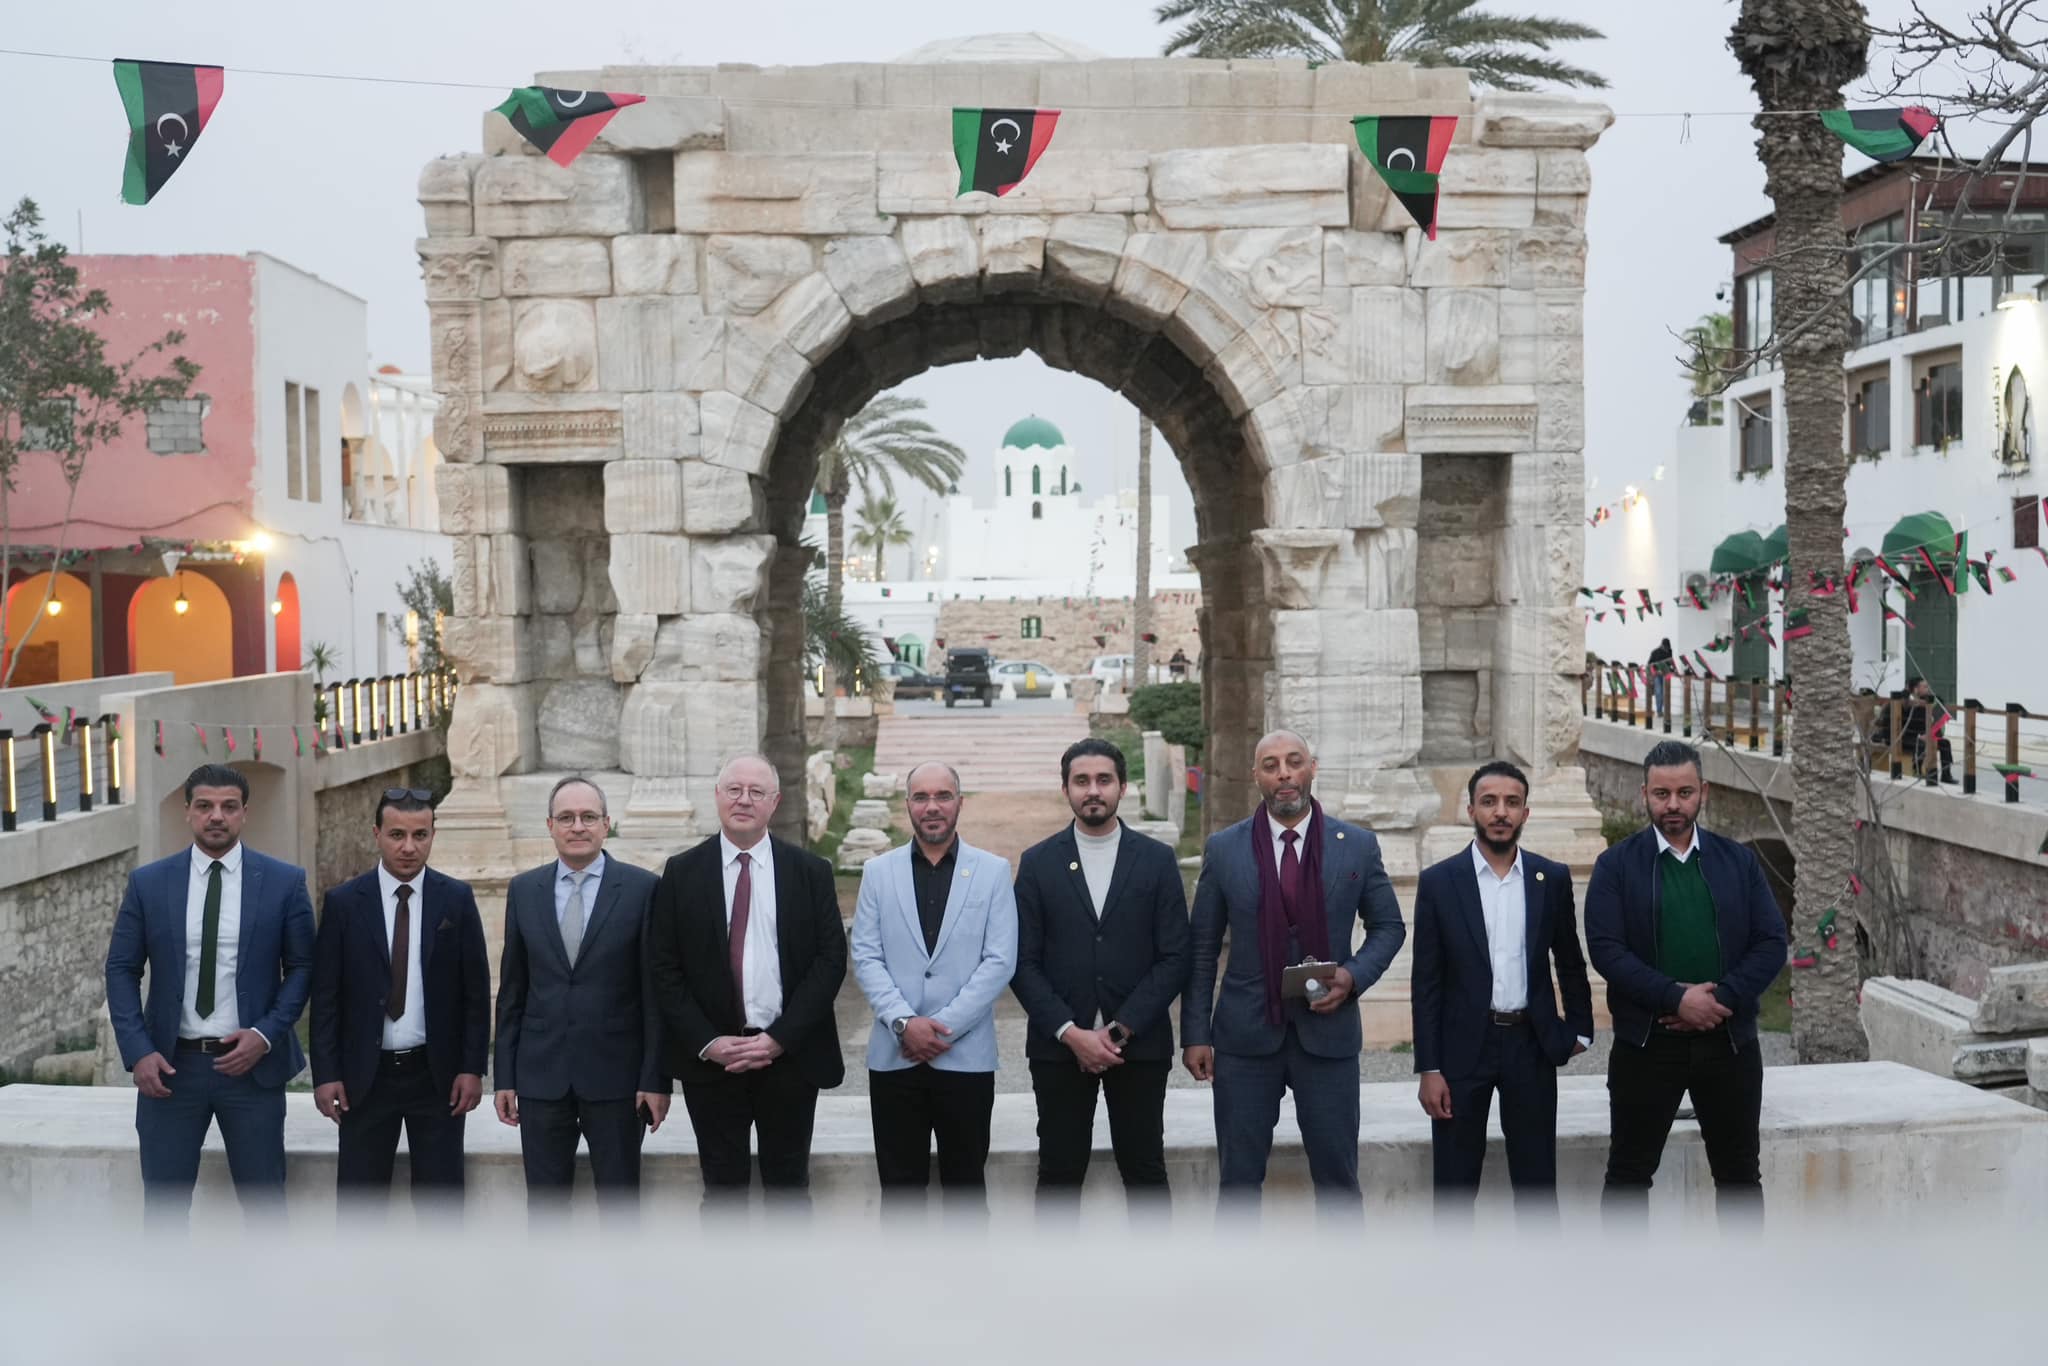 A French military medical delegation visits the old city of Tripoli.